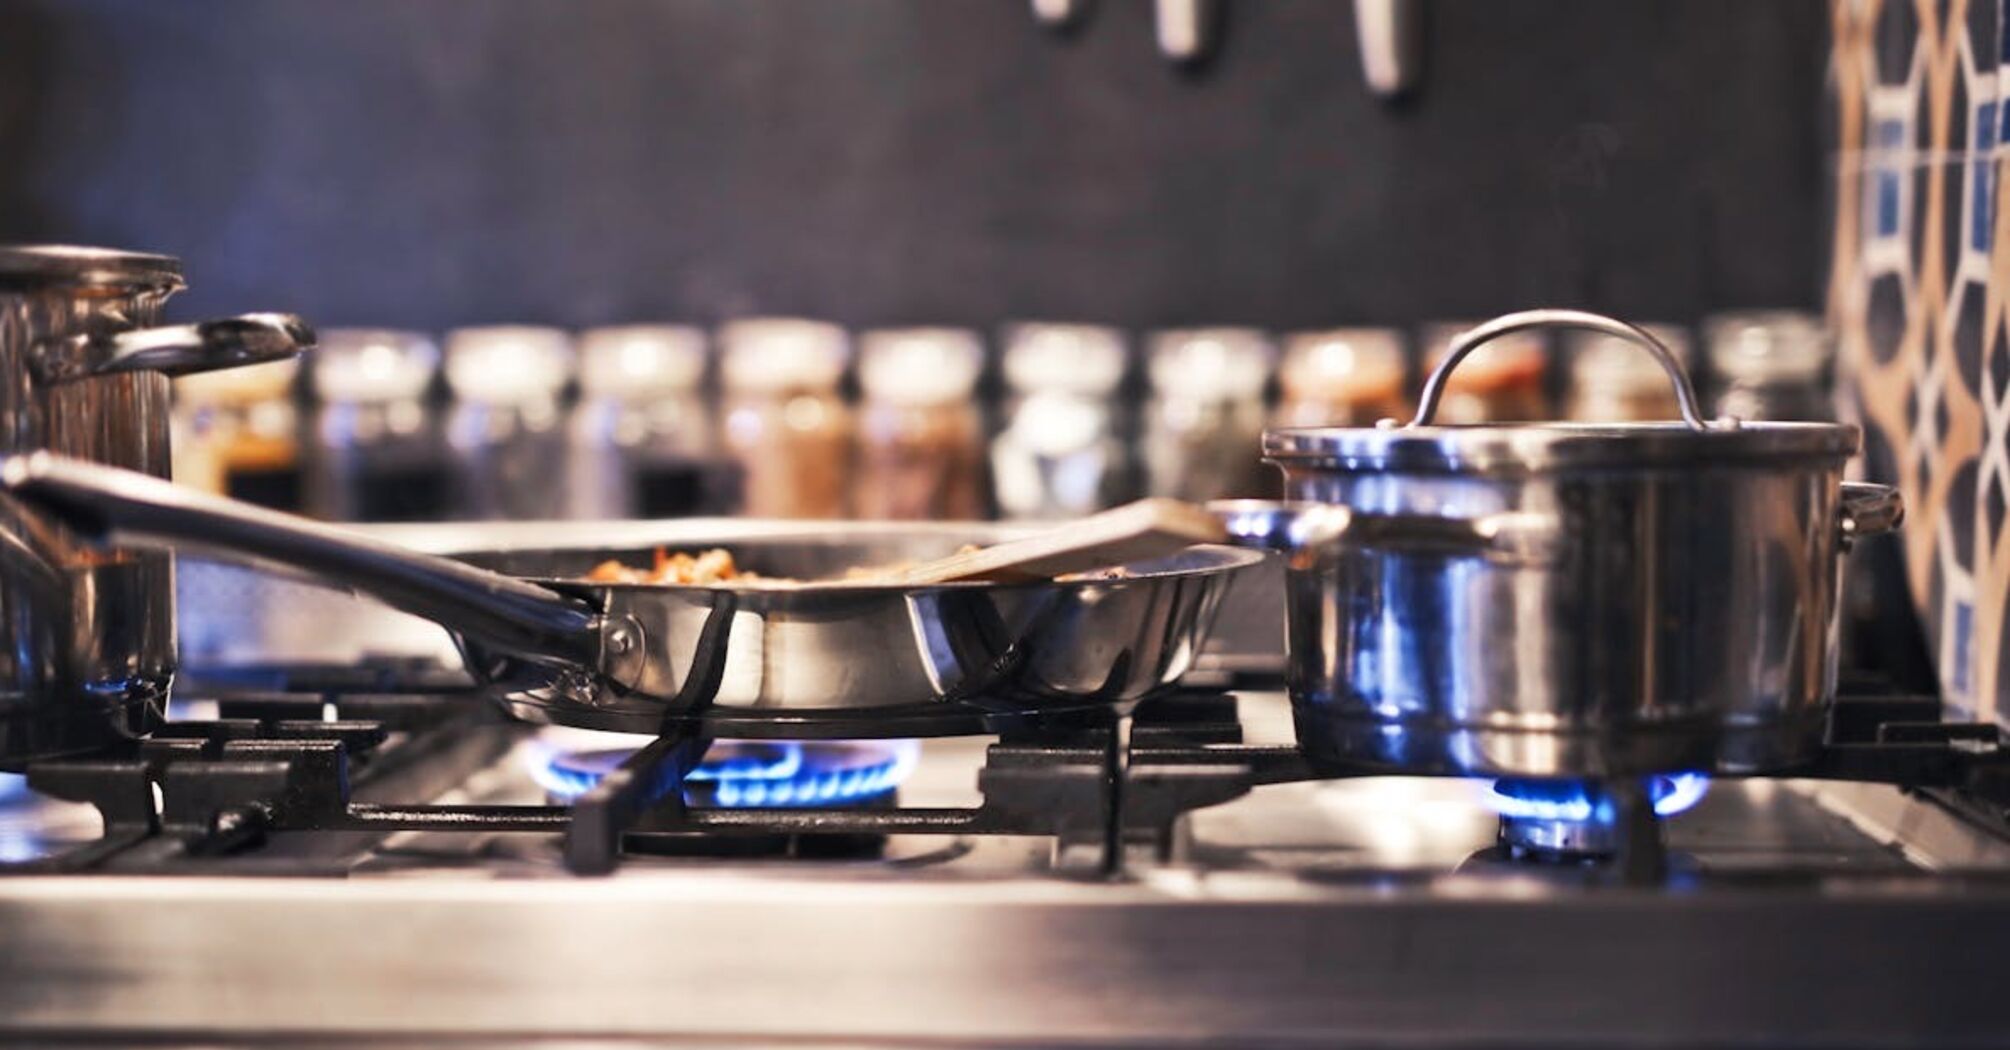 How to effectively clean burnt stainless steel pans without scratching them: expert tips